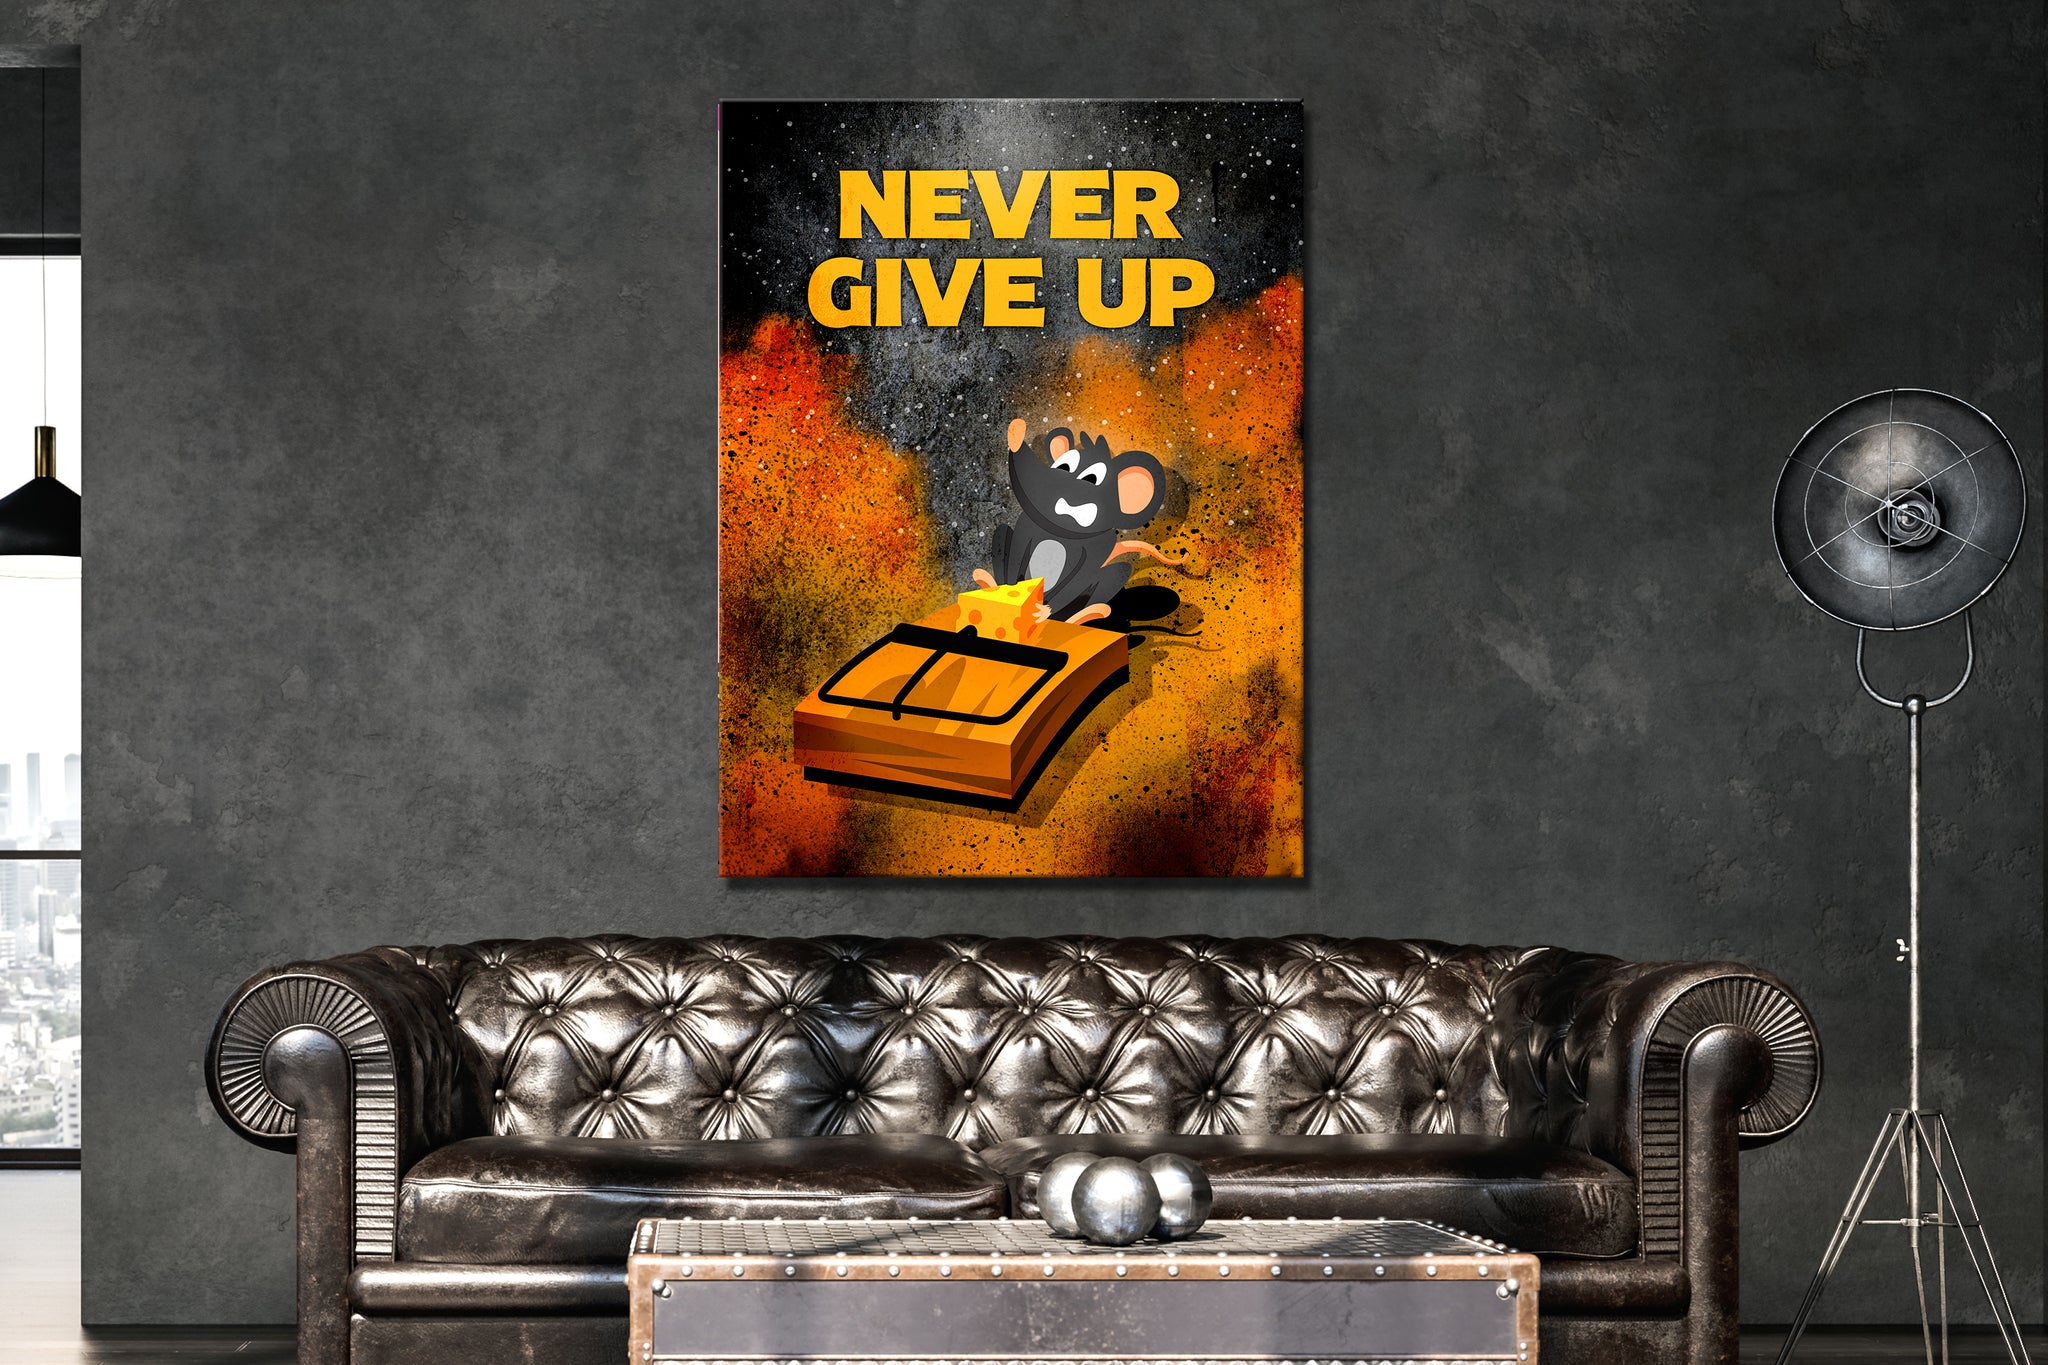 Never Give Up - Motivational - Canvas Wall Art